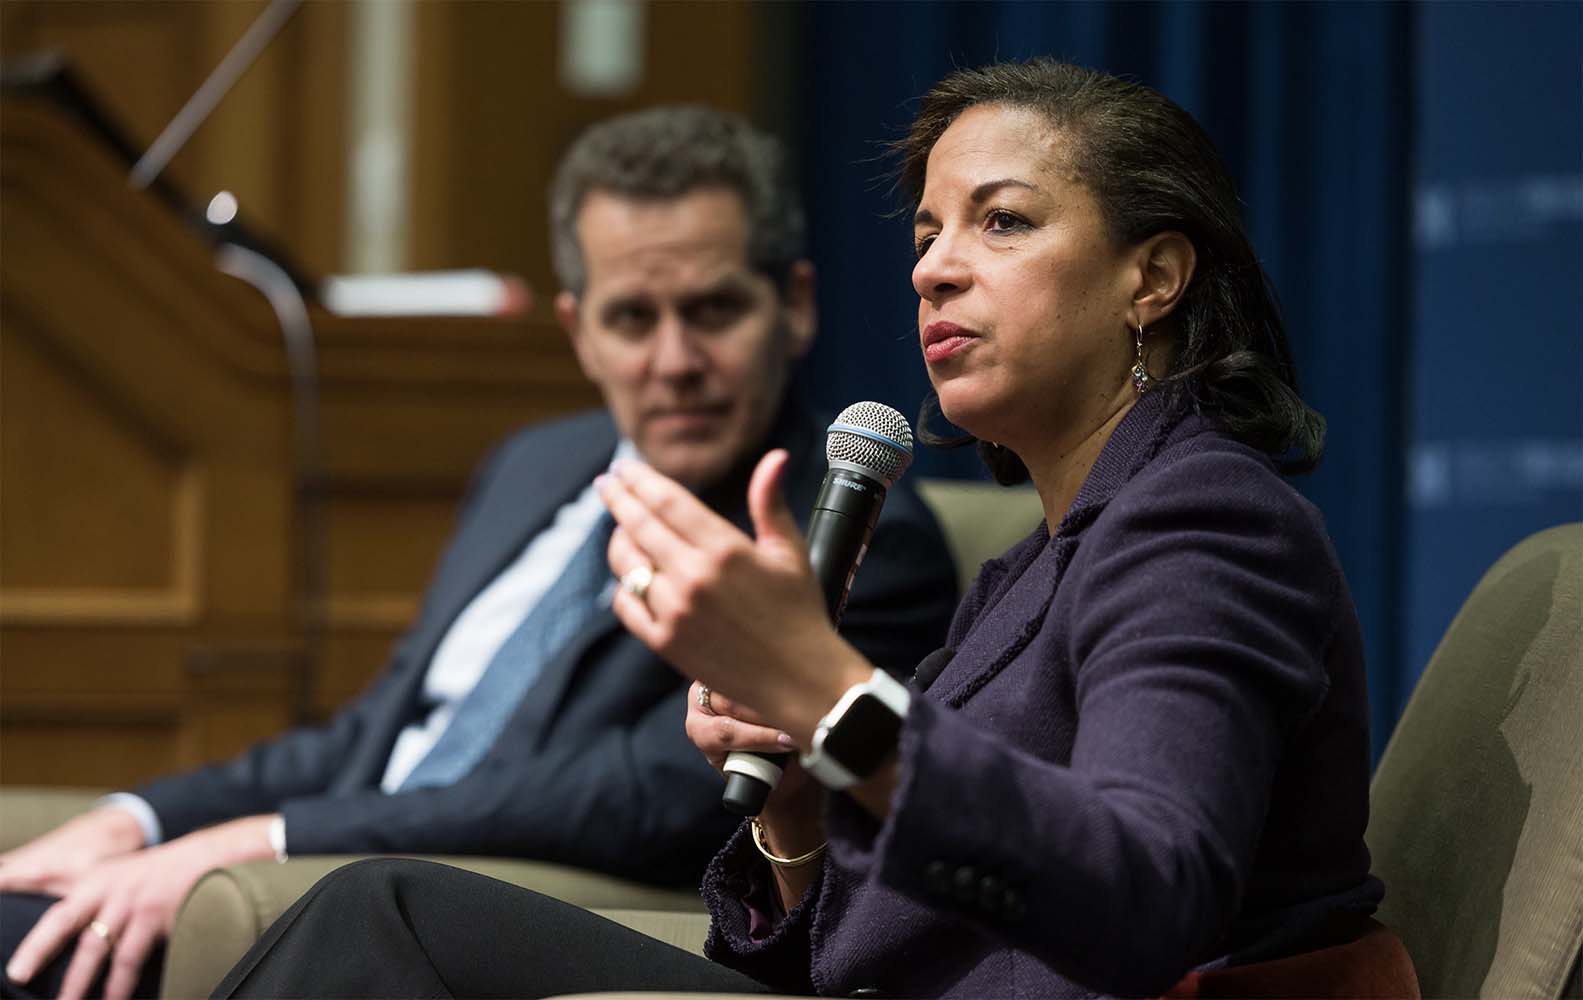 Photo of former United Nations Ambassador and former U.S. National Security Advisor Susan Rice in conversation with Ford School Dean Michael S. Barr 